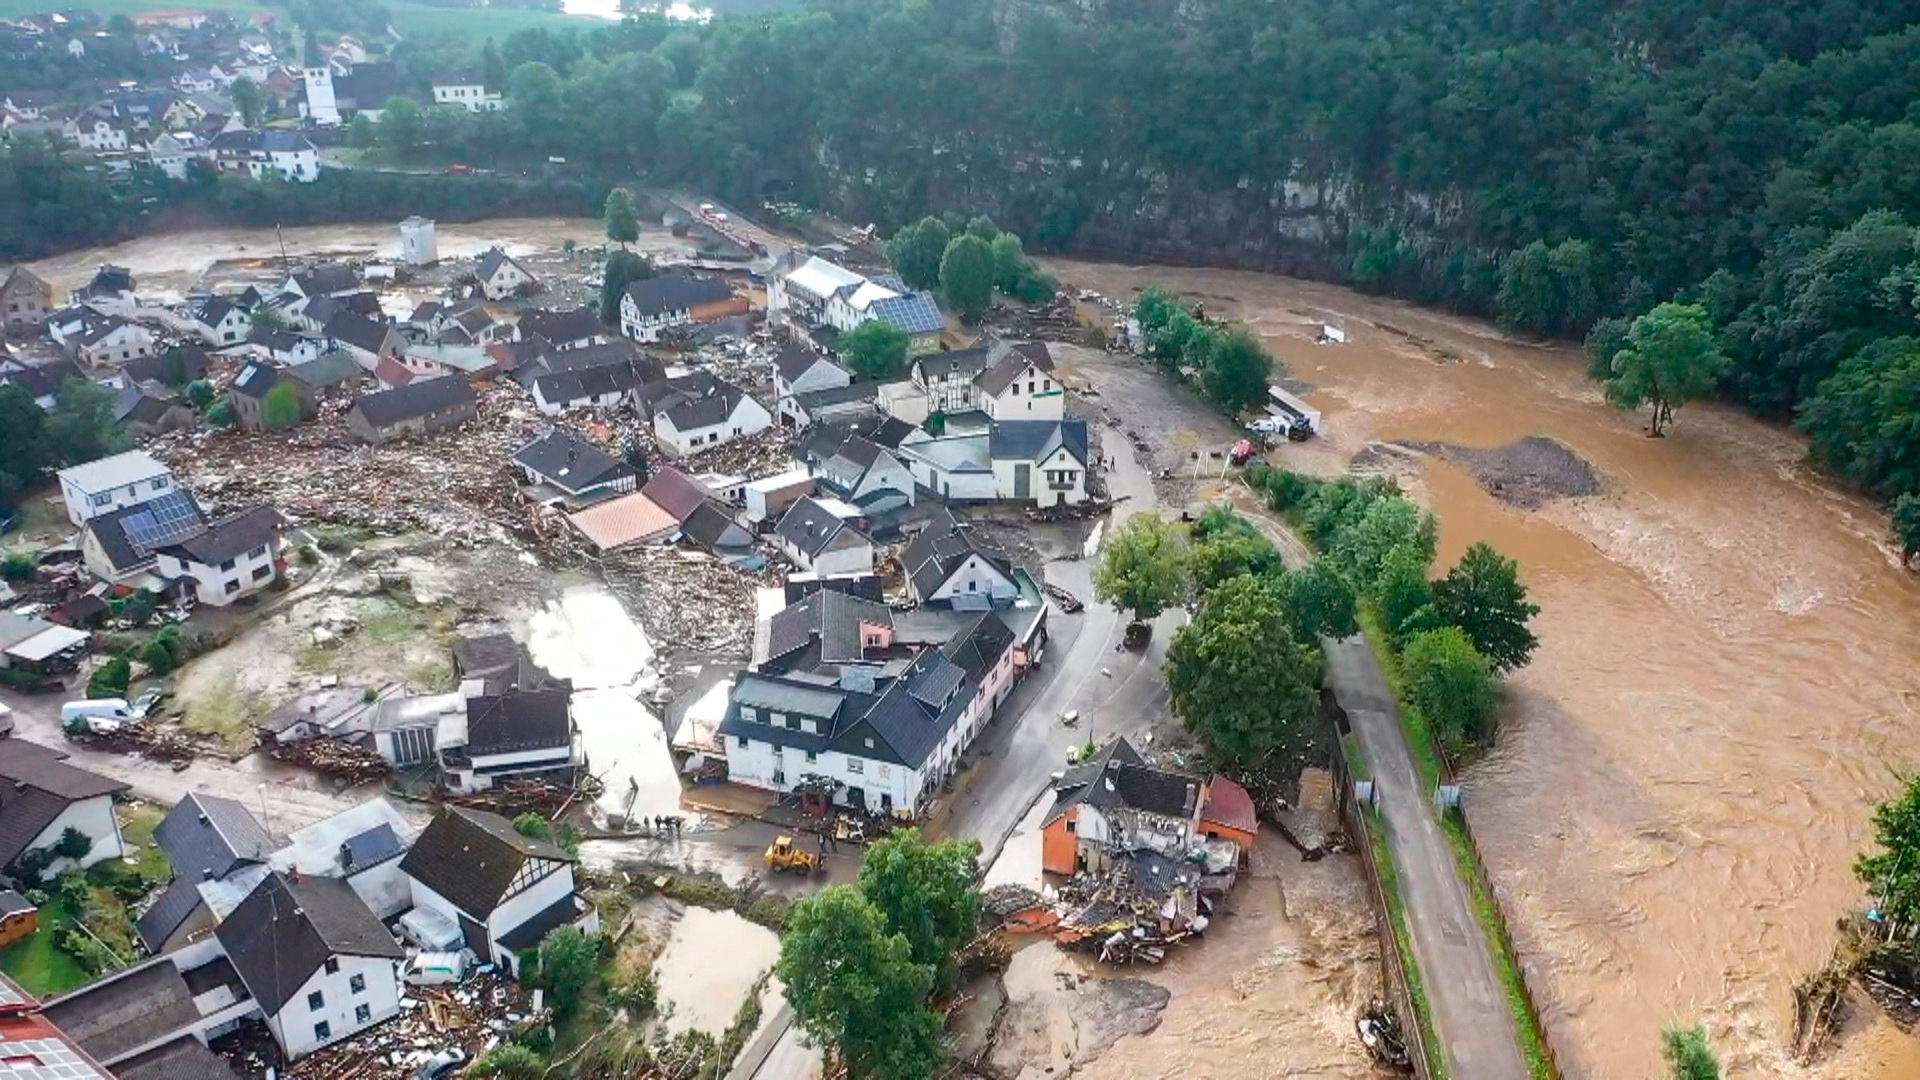 What caused flooding in Germany?